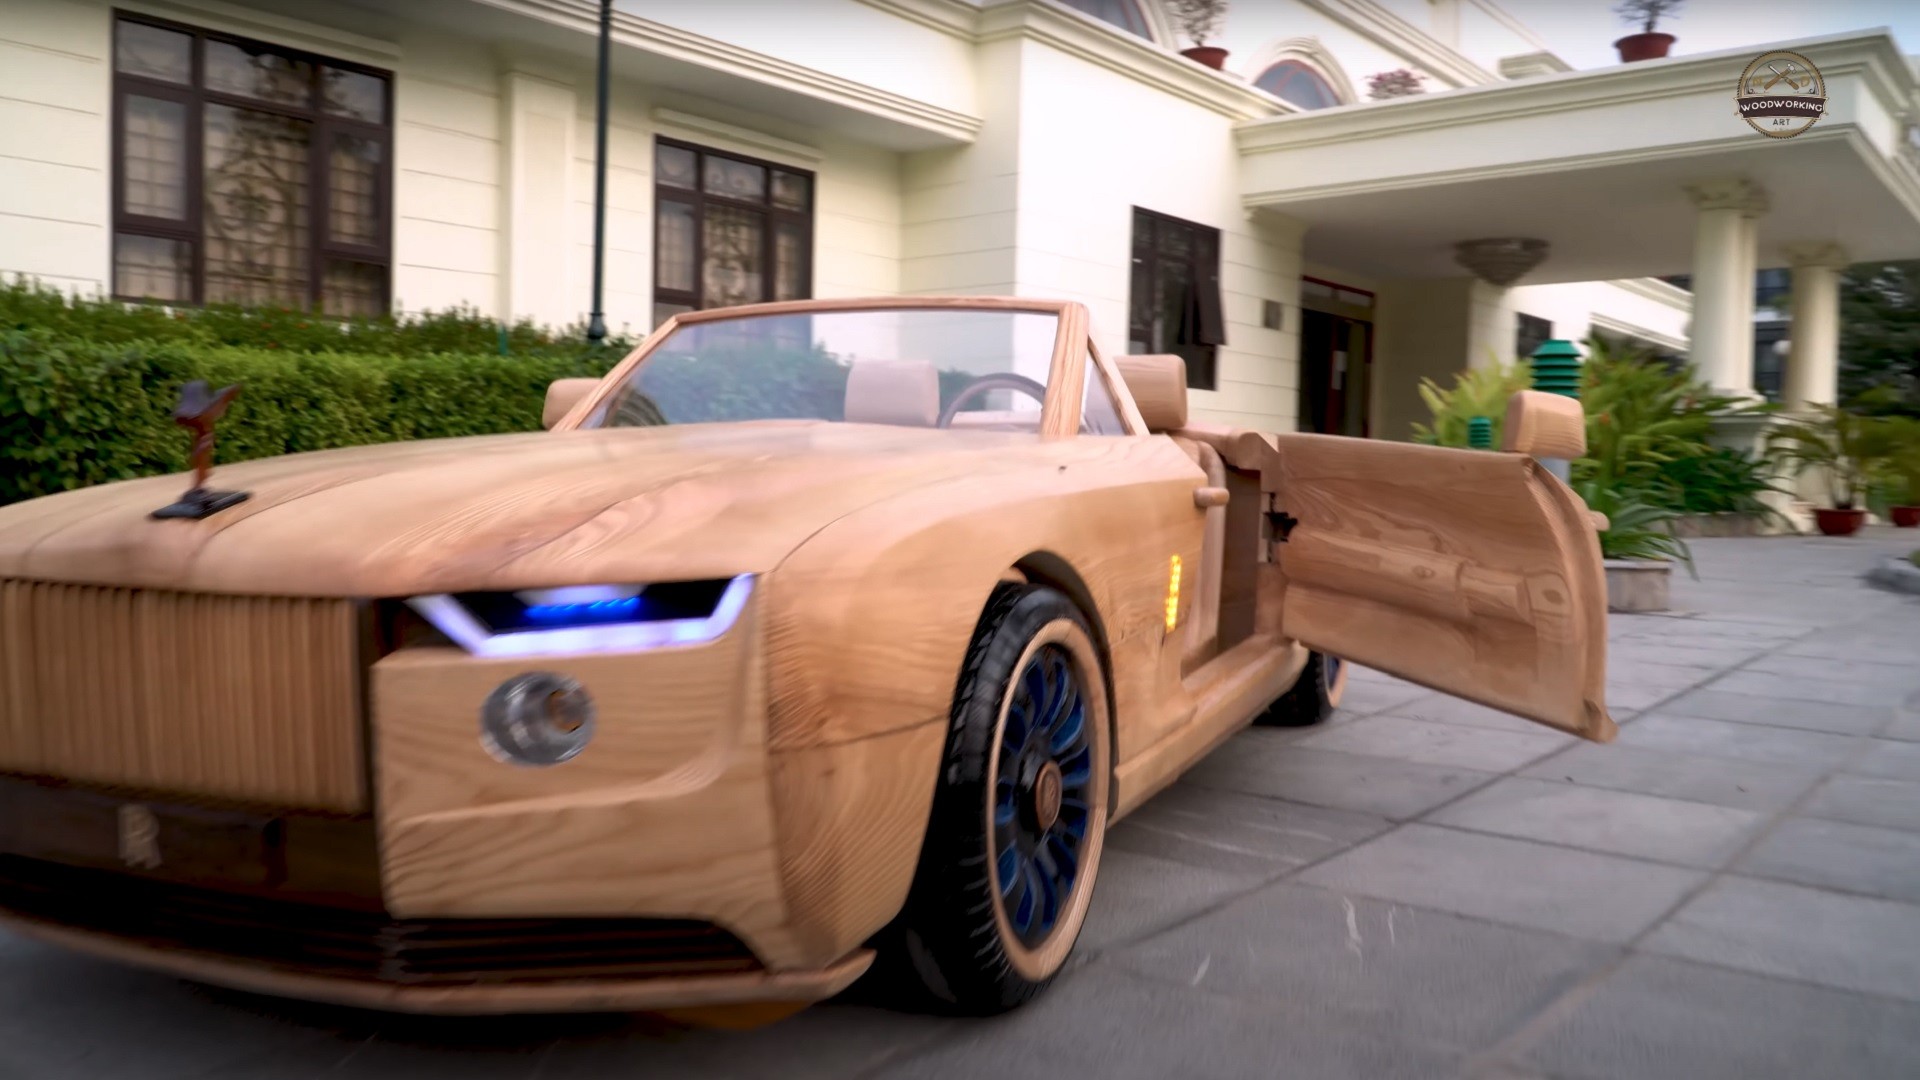 Father and Son Go for a Drive in Style in Gorgeous, Wooden Rolls